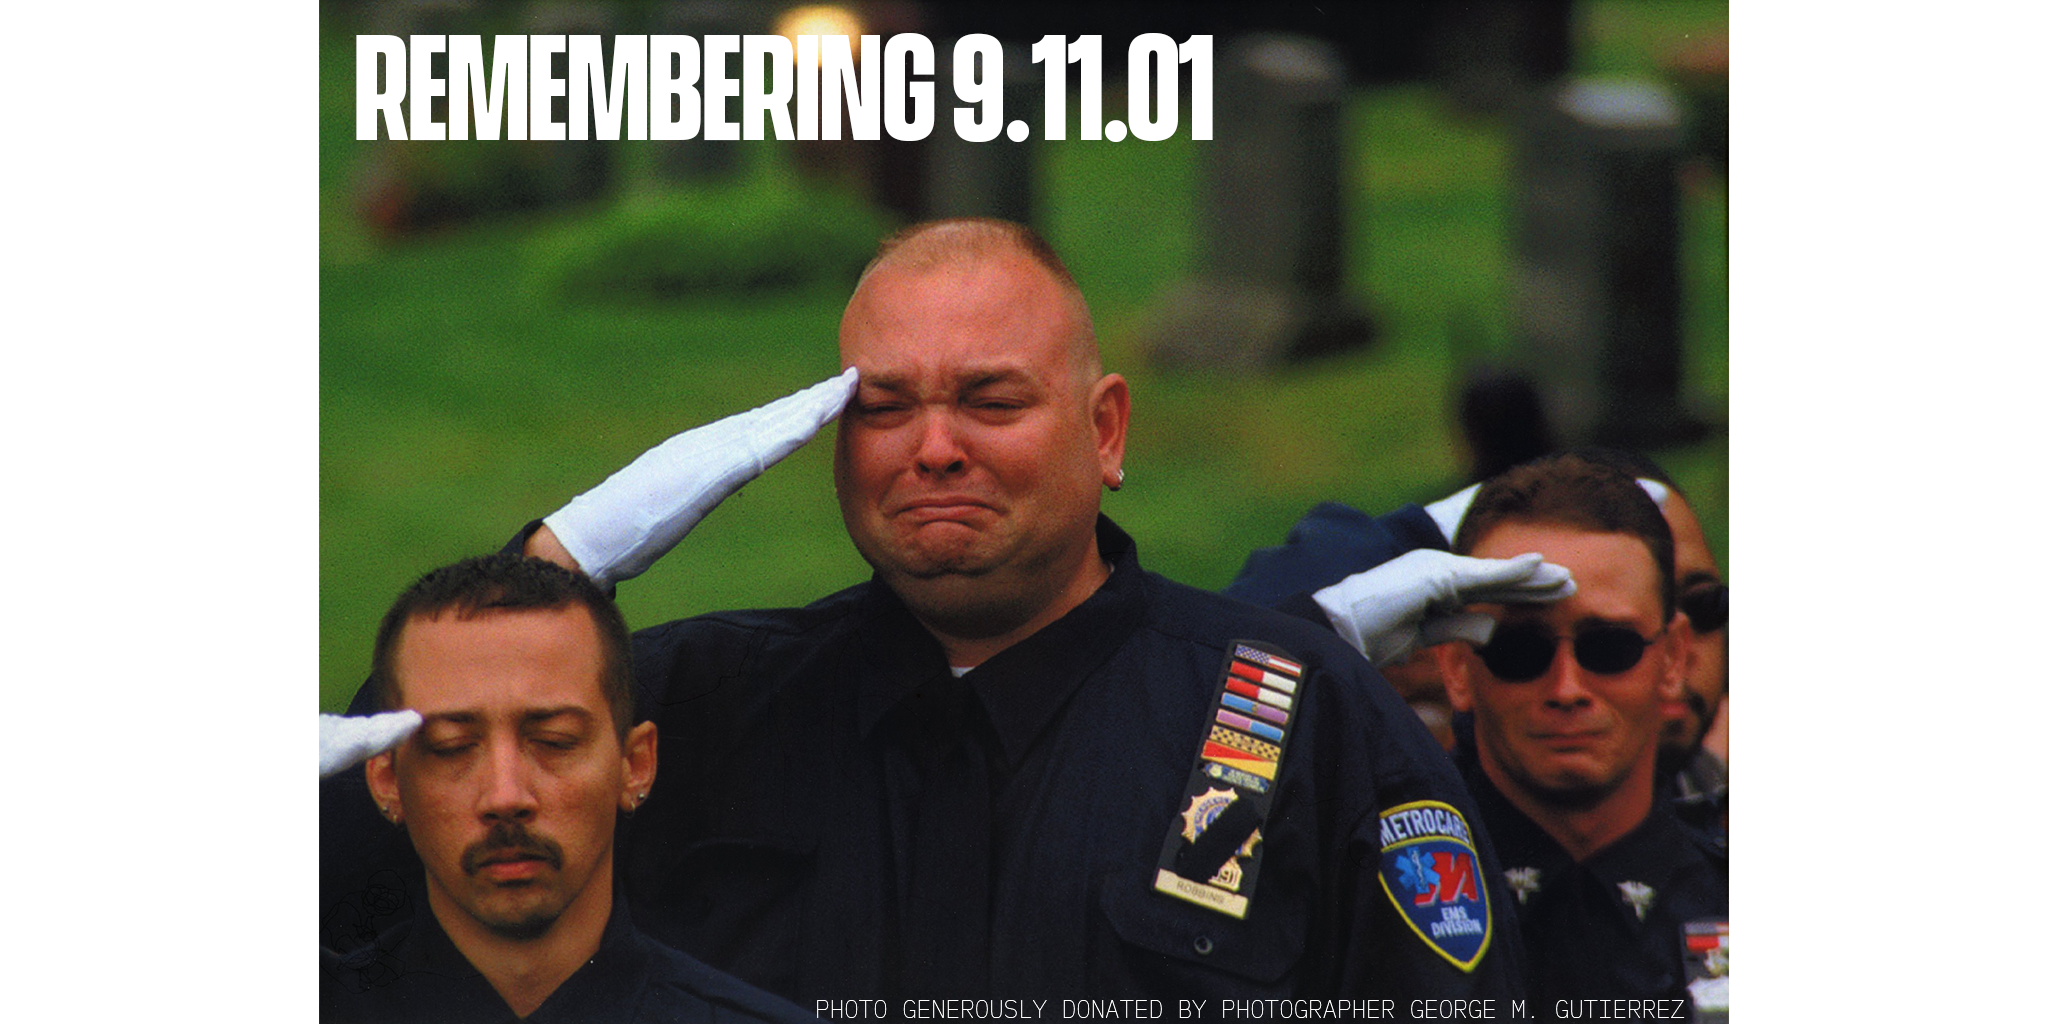 EMS workers salute fallen fire fighters and rescue workers from 9.11 attacks